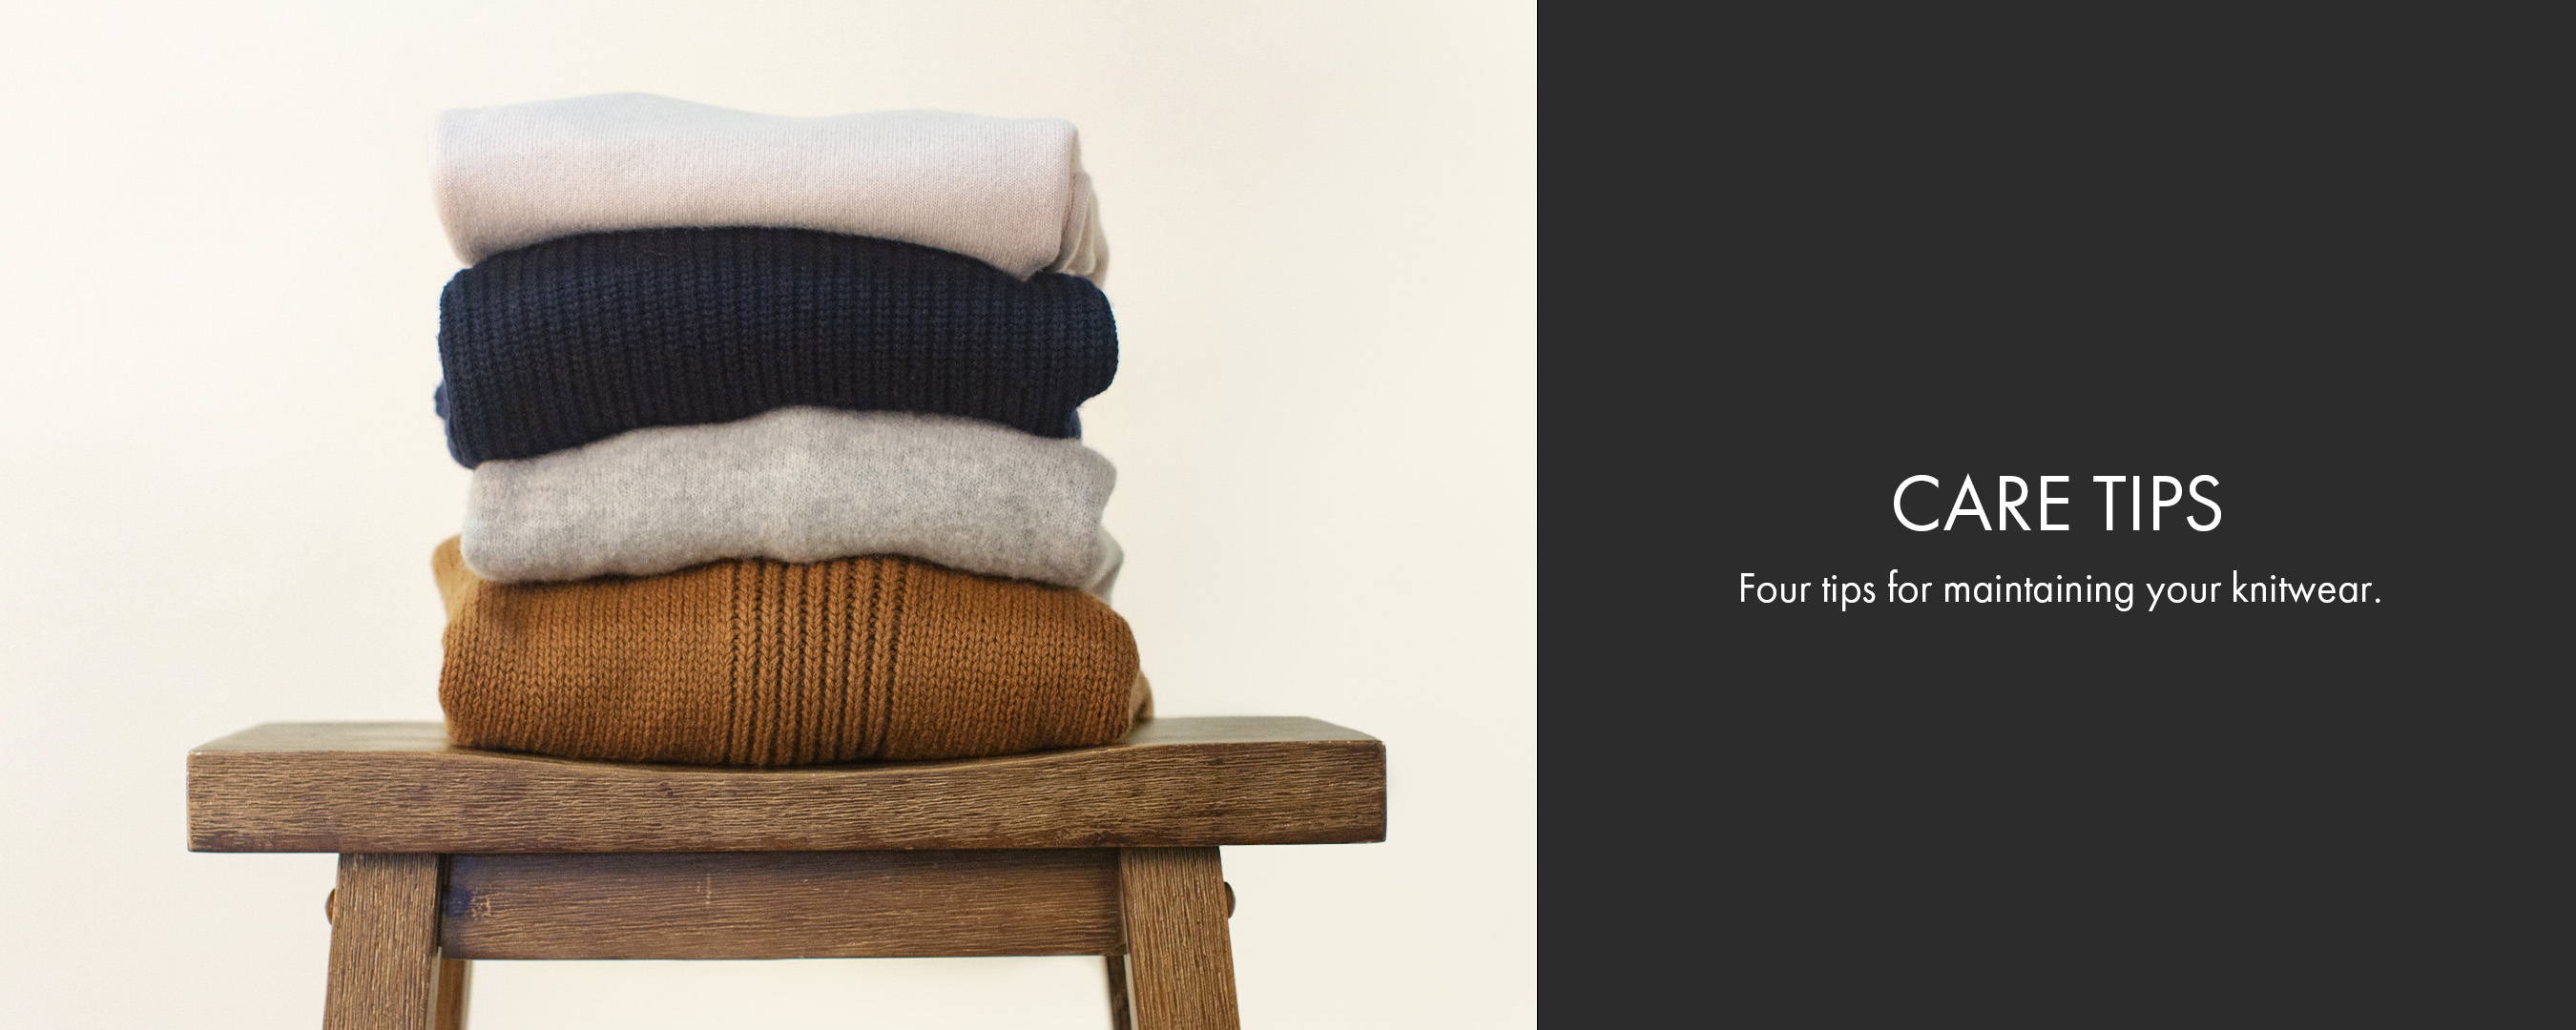 A stack of sweaters on a stool. Text overlay reads "Care Tips, four tips for maintaining your knitwear".